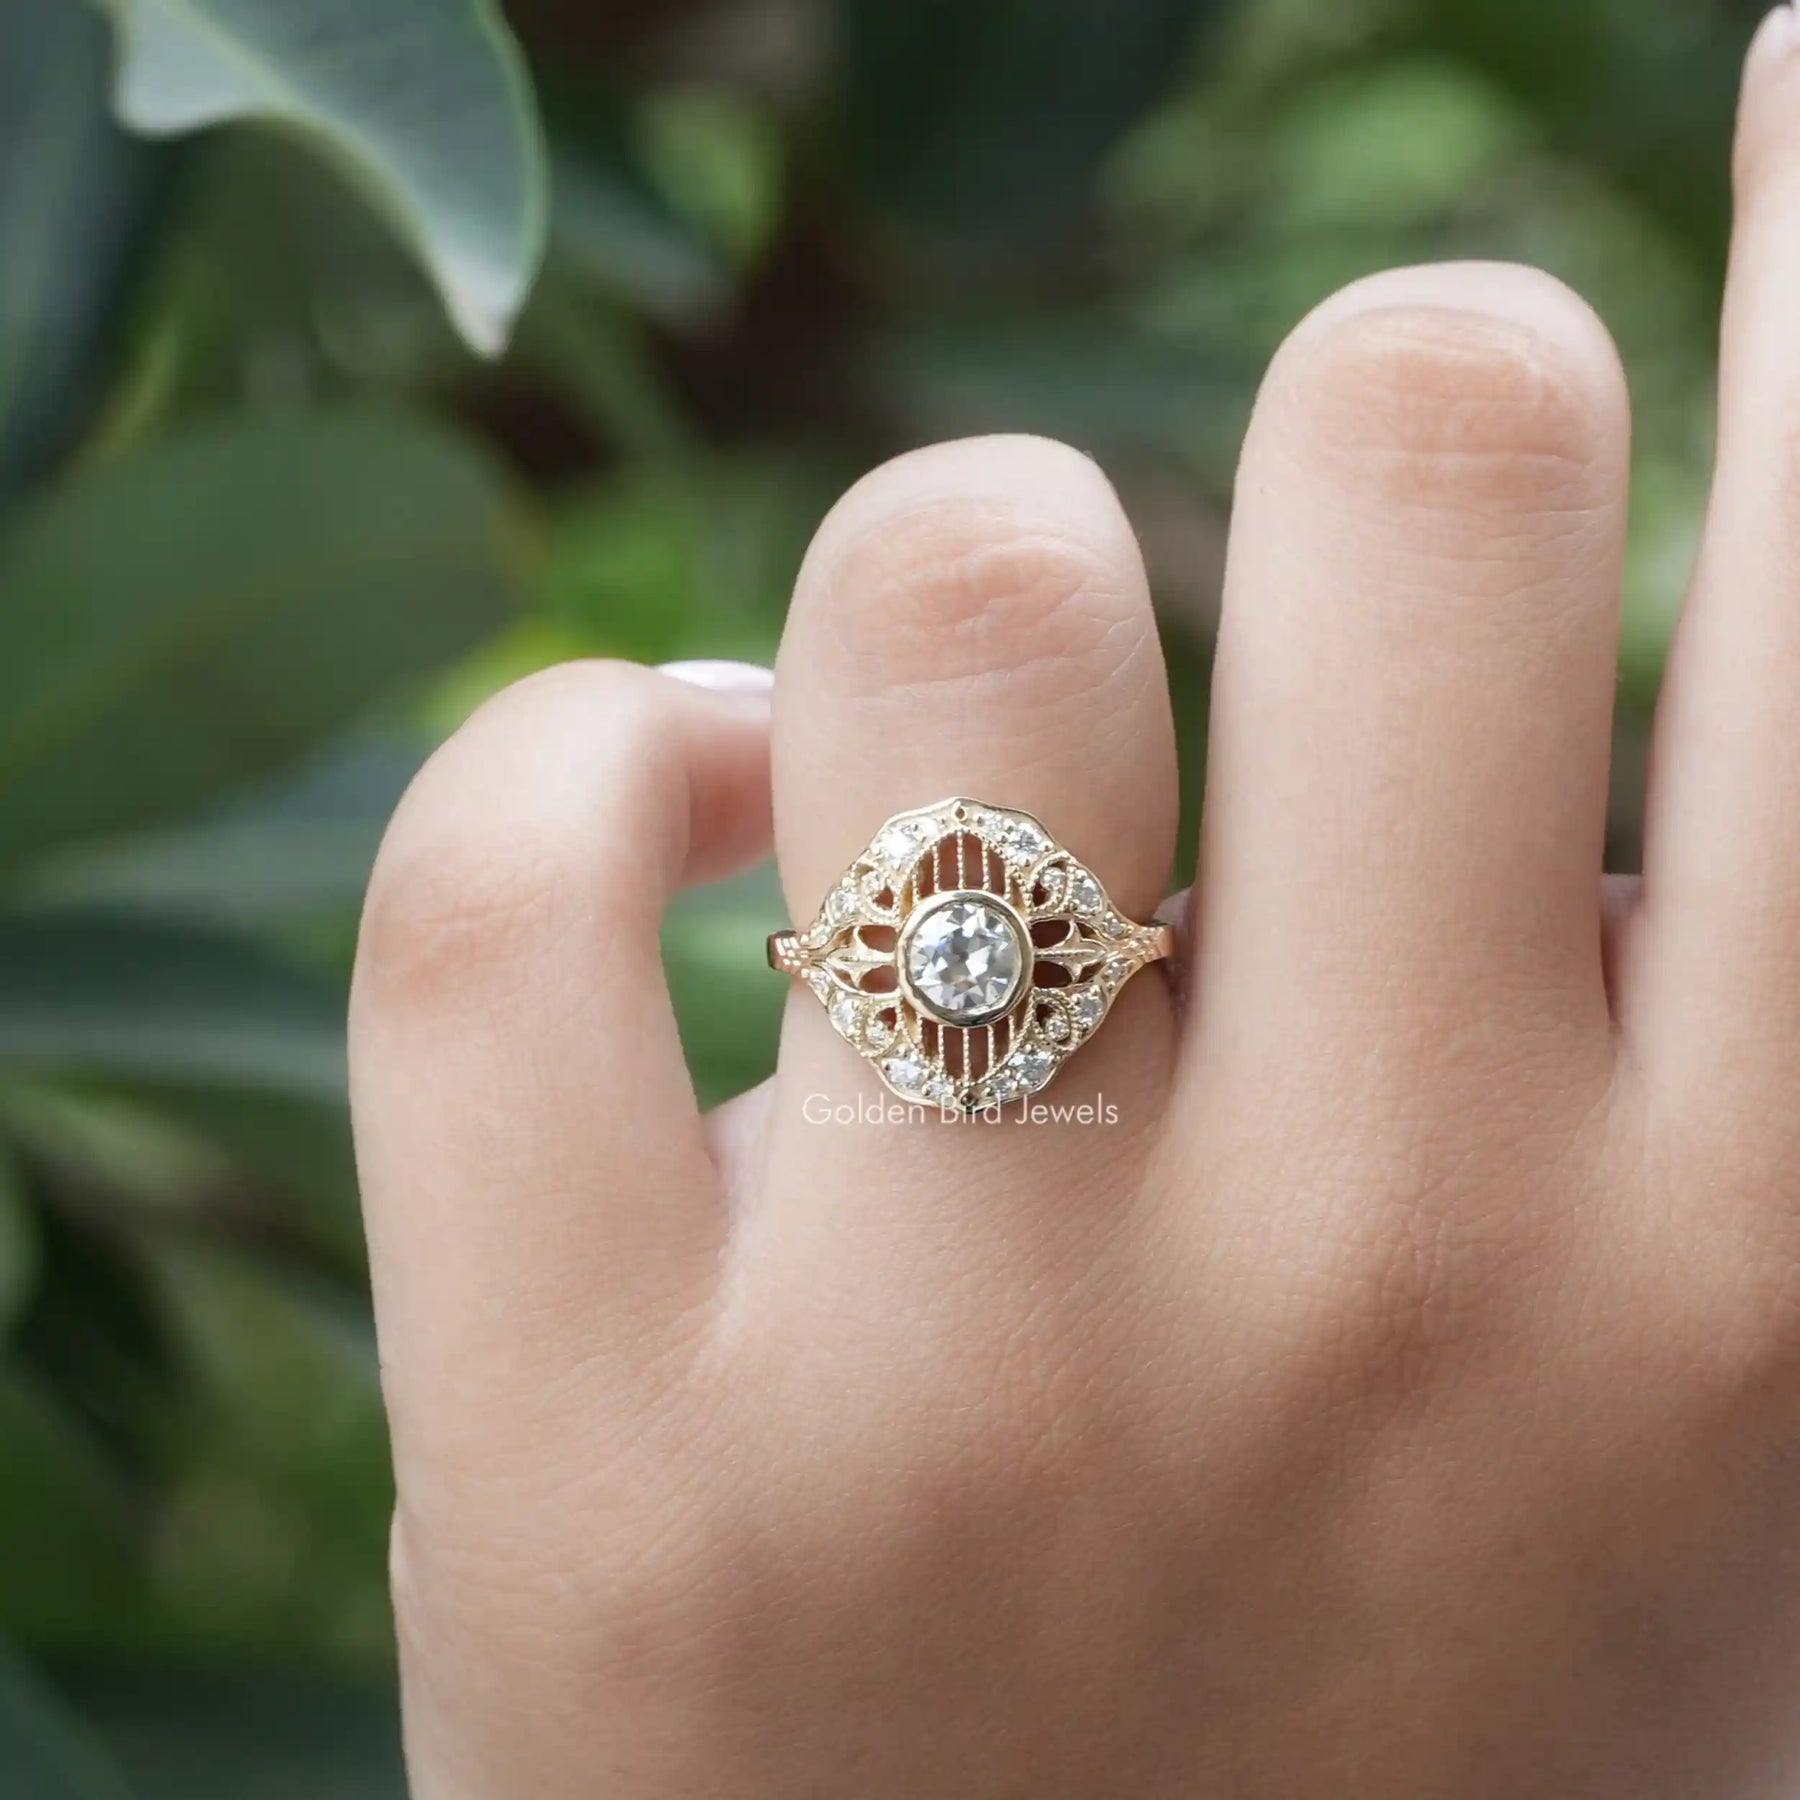 [In finger frond view of round cut vintage style ring made of vvs clarity]-[Golden Bird Jewels]